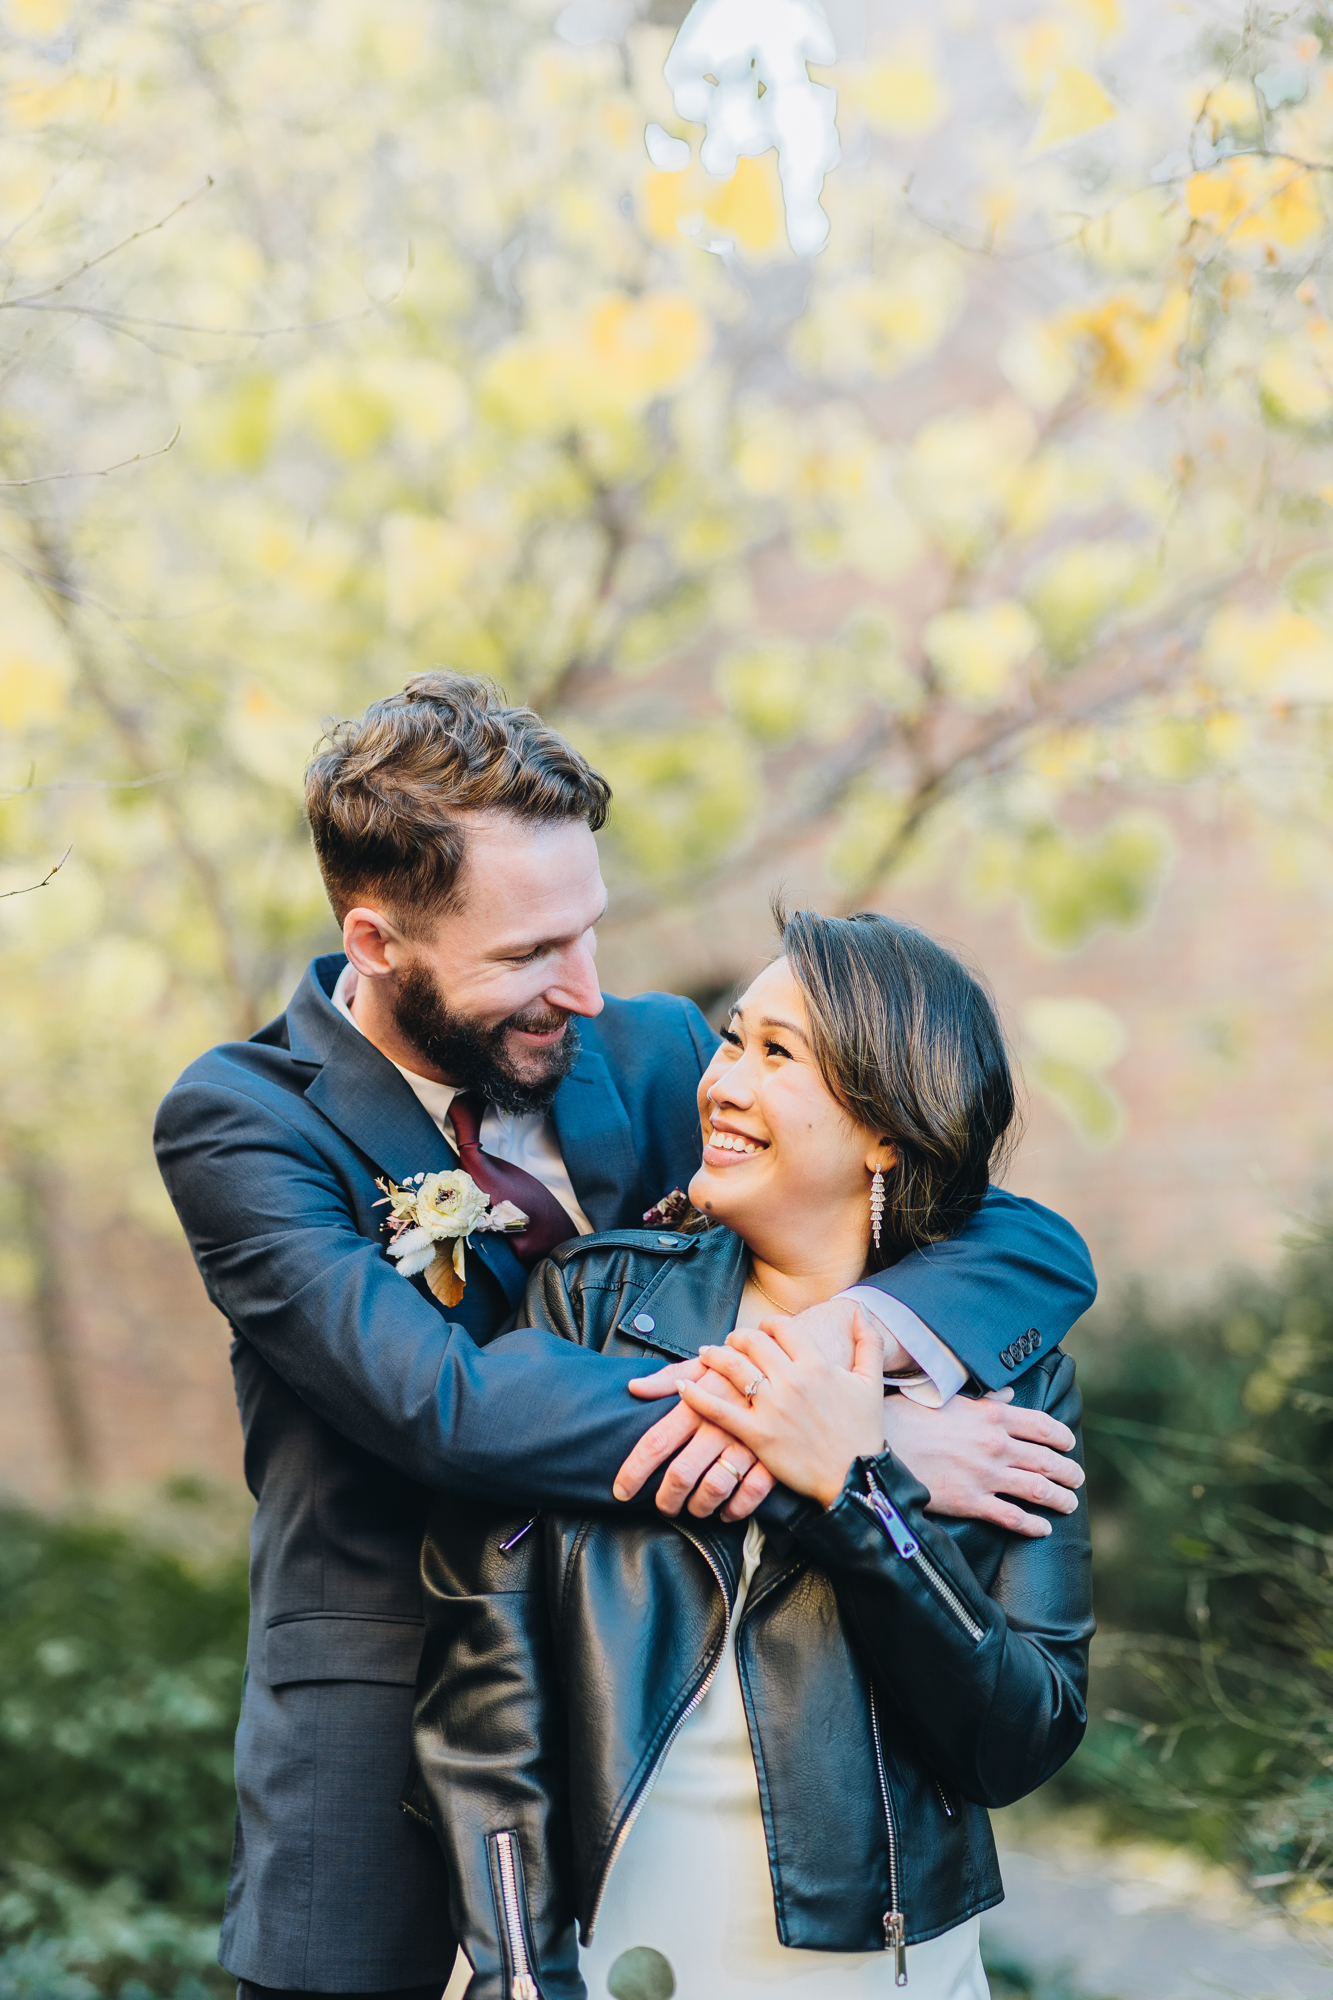 Intimate Fall DUMBO Elopement with New York views and foliage